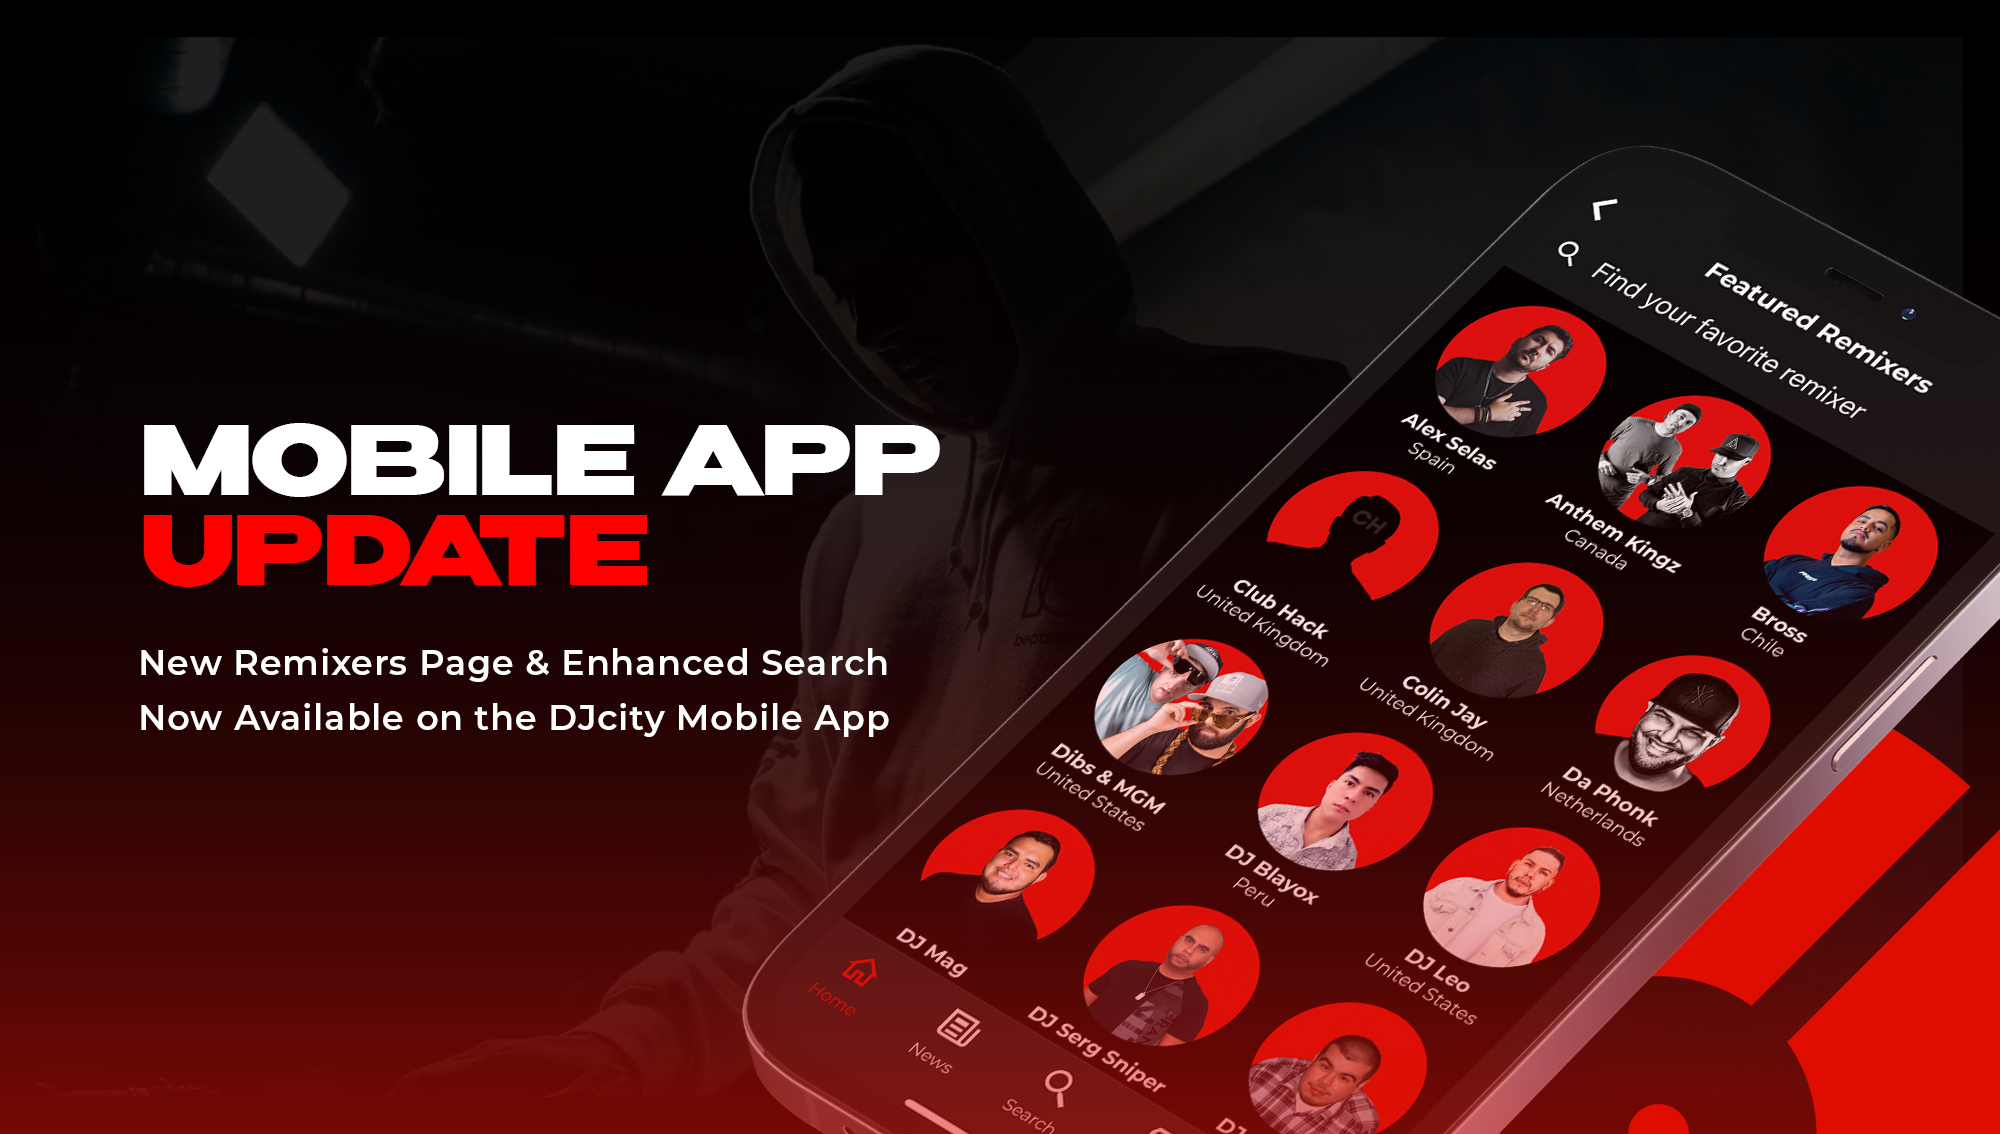 New Remixers Page Now Available On the DJcity Mobile App